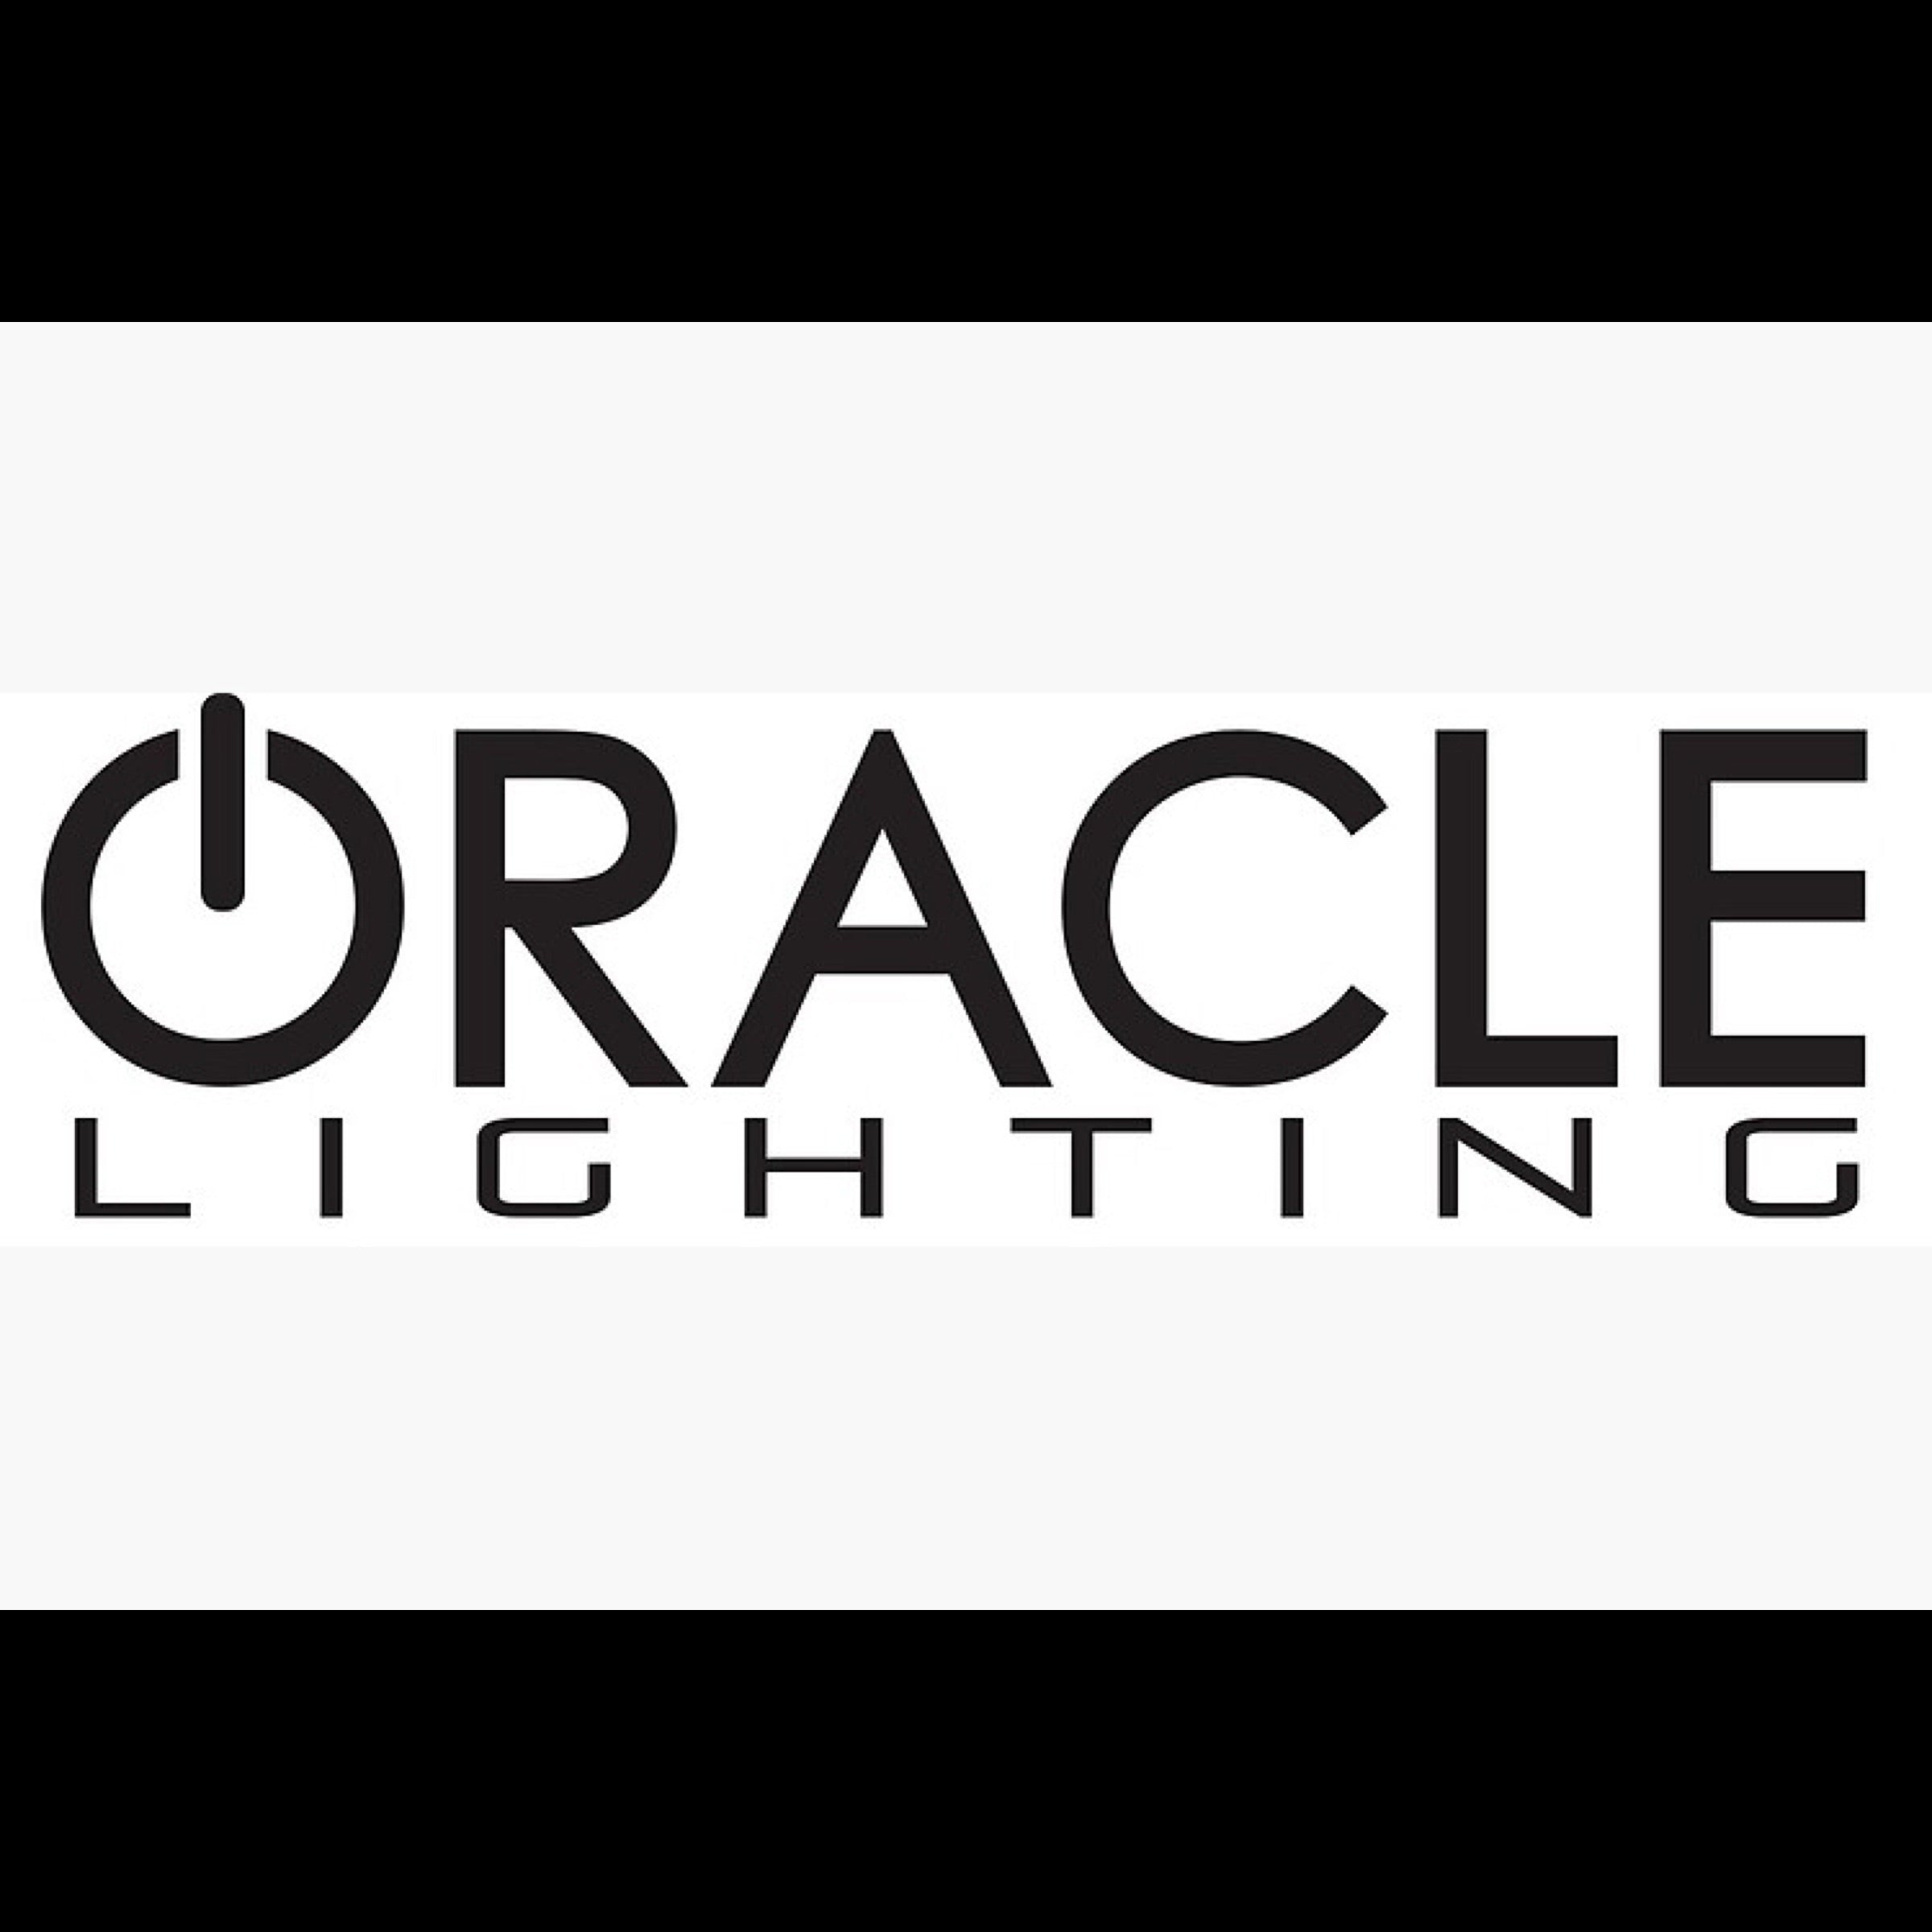 Oracle Lighting logo with white background